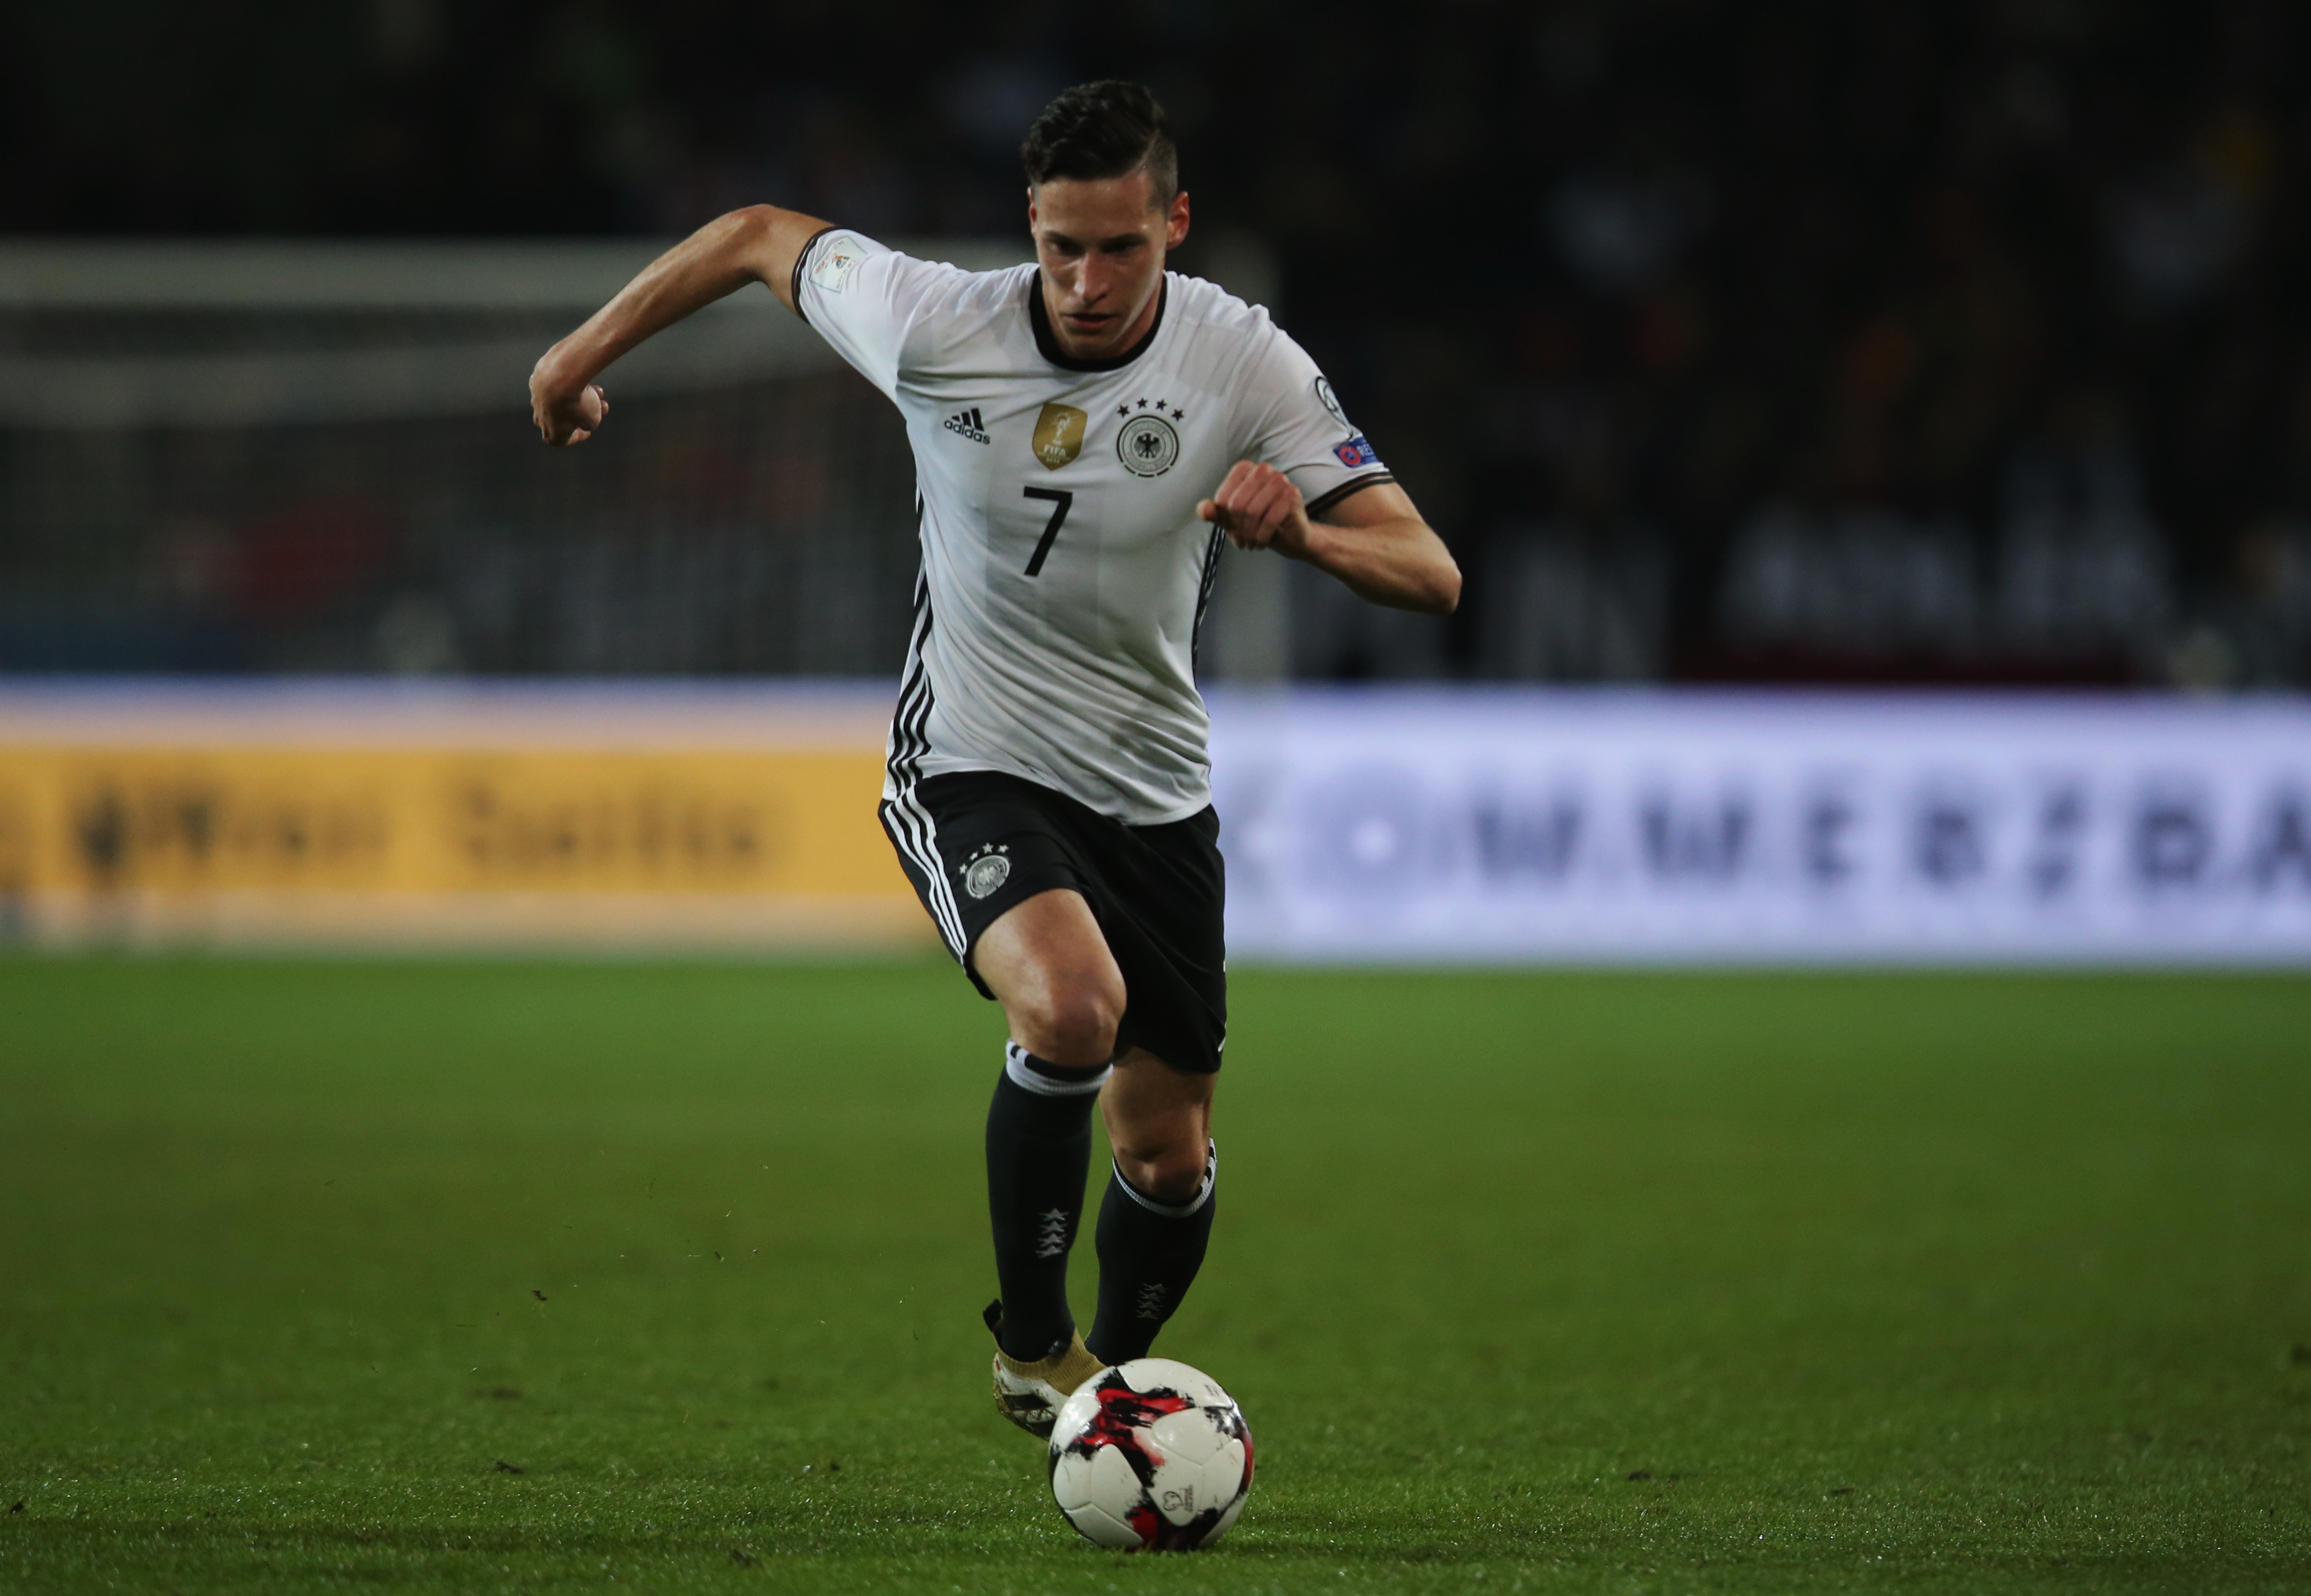 HANOVER, GERMANY - OCTOBER 11:  Julian Draxler of Germany controls the ball during the FIFA 2018 World Cup Qualifier between Germany and Northern Ireland at HDI-Arena on October 11, 2016 in Hanover, Germany.  (Photo by Joern Pollex/Bongarts/Getty Images)